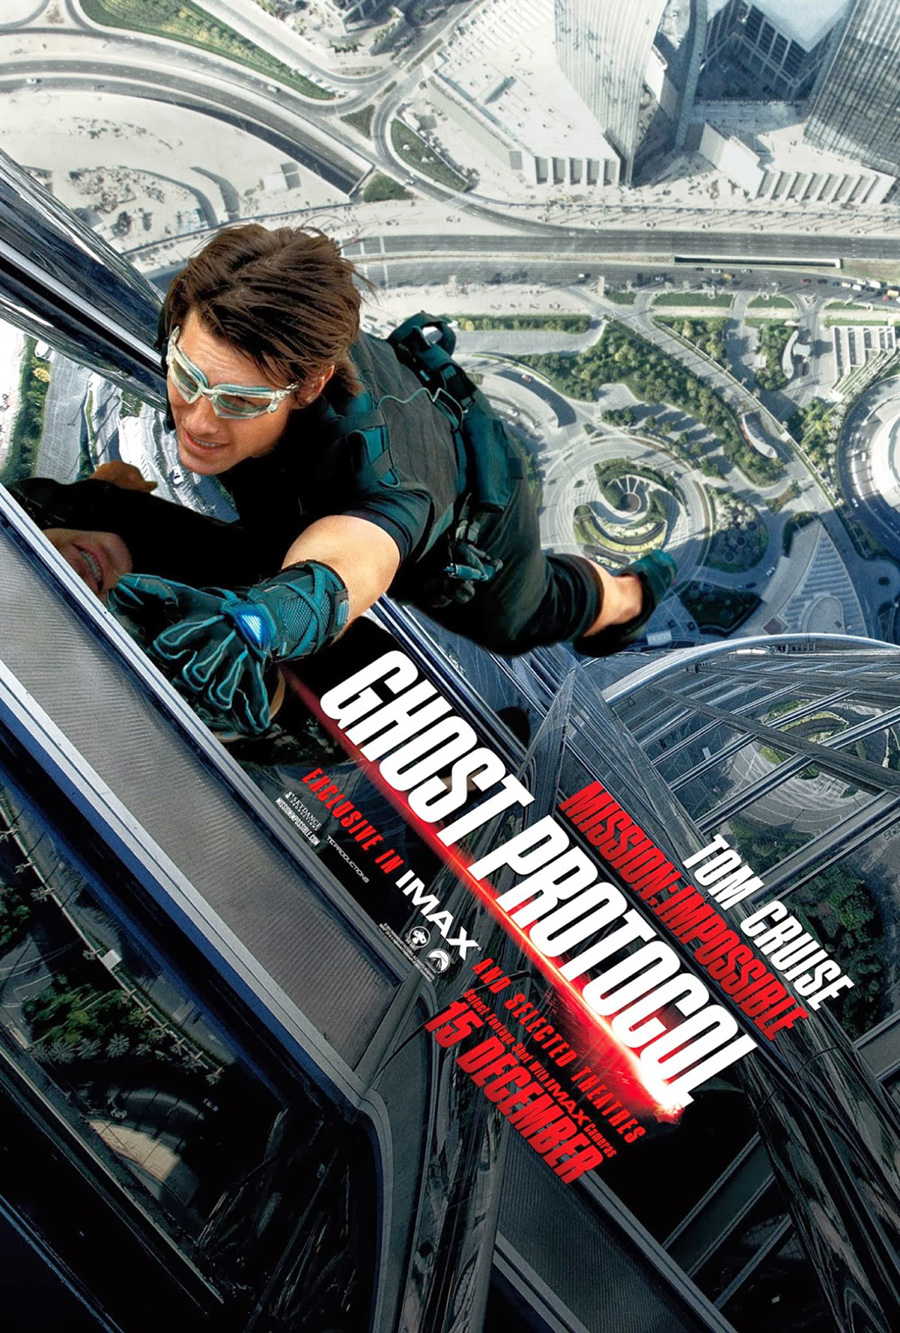 TOM-CRUISE-Mission-impossible-Ghost-protocole-2.jpg